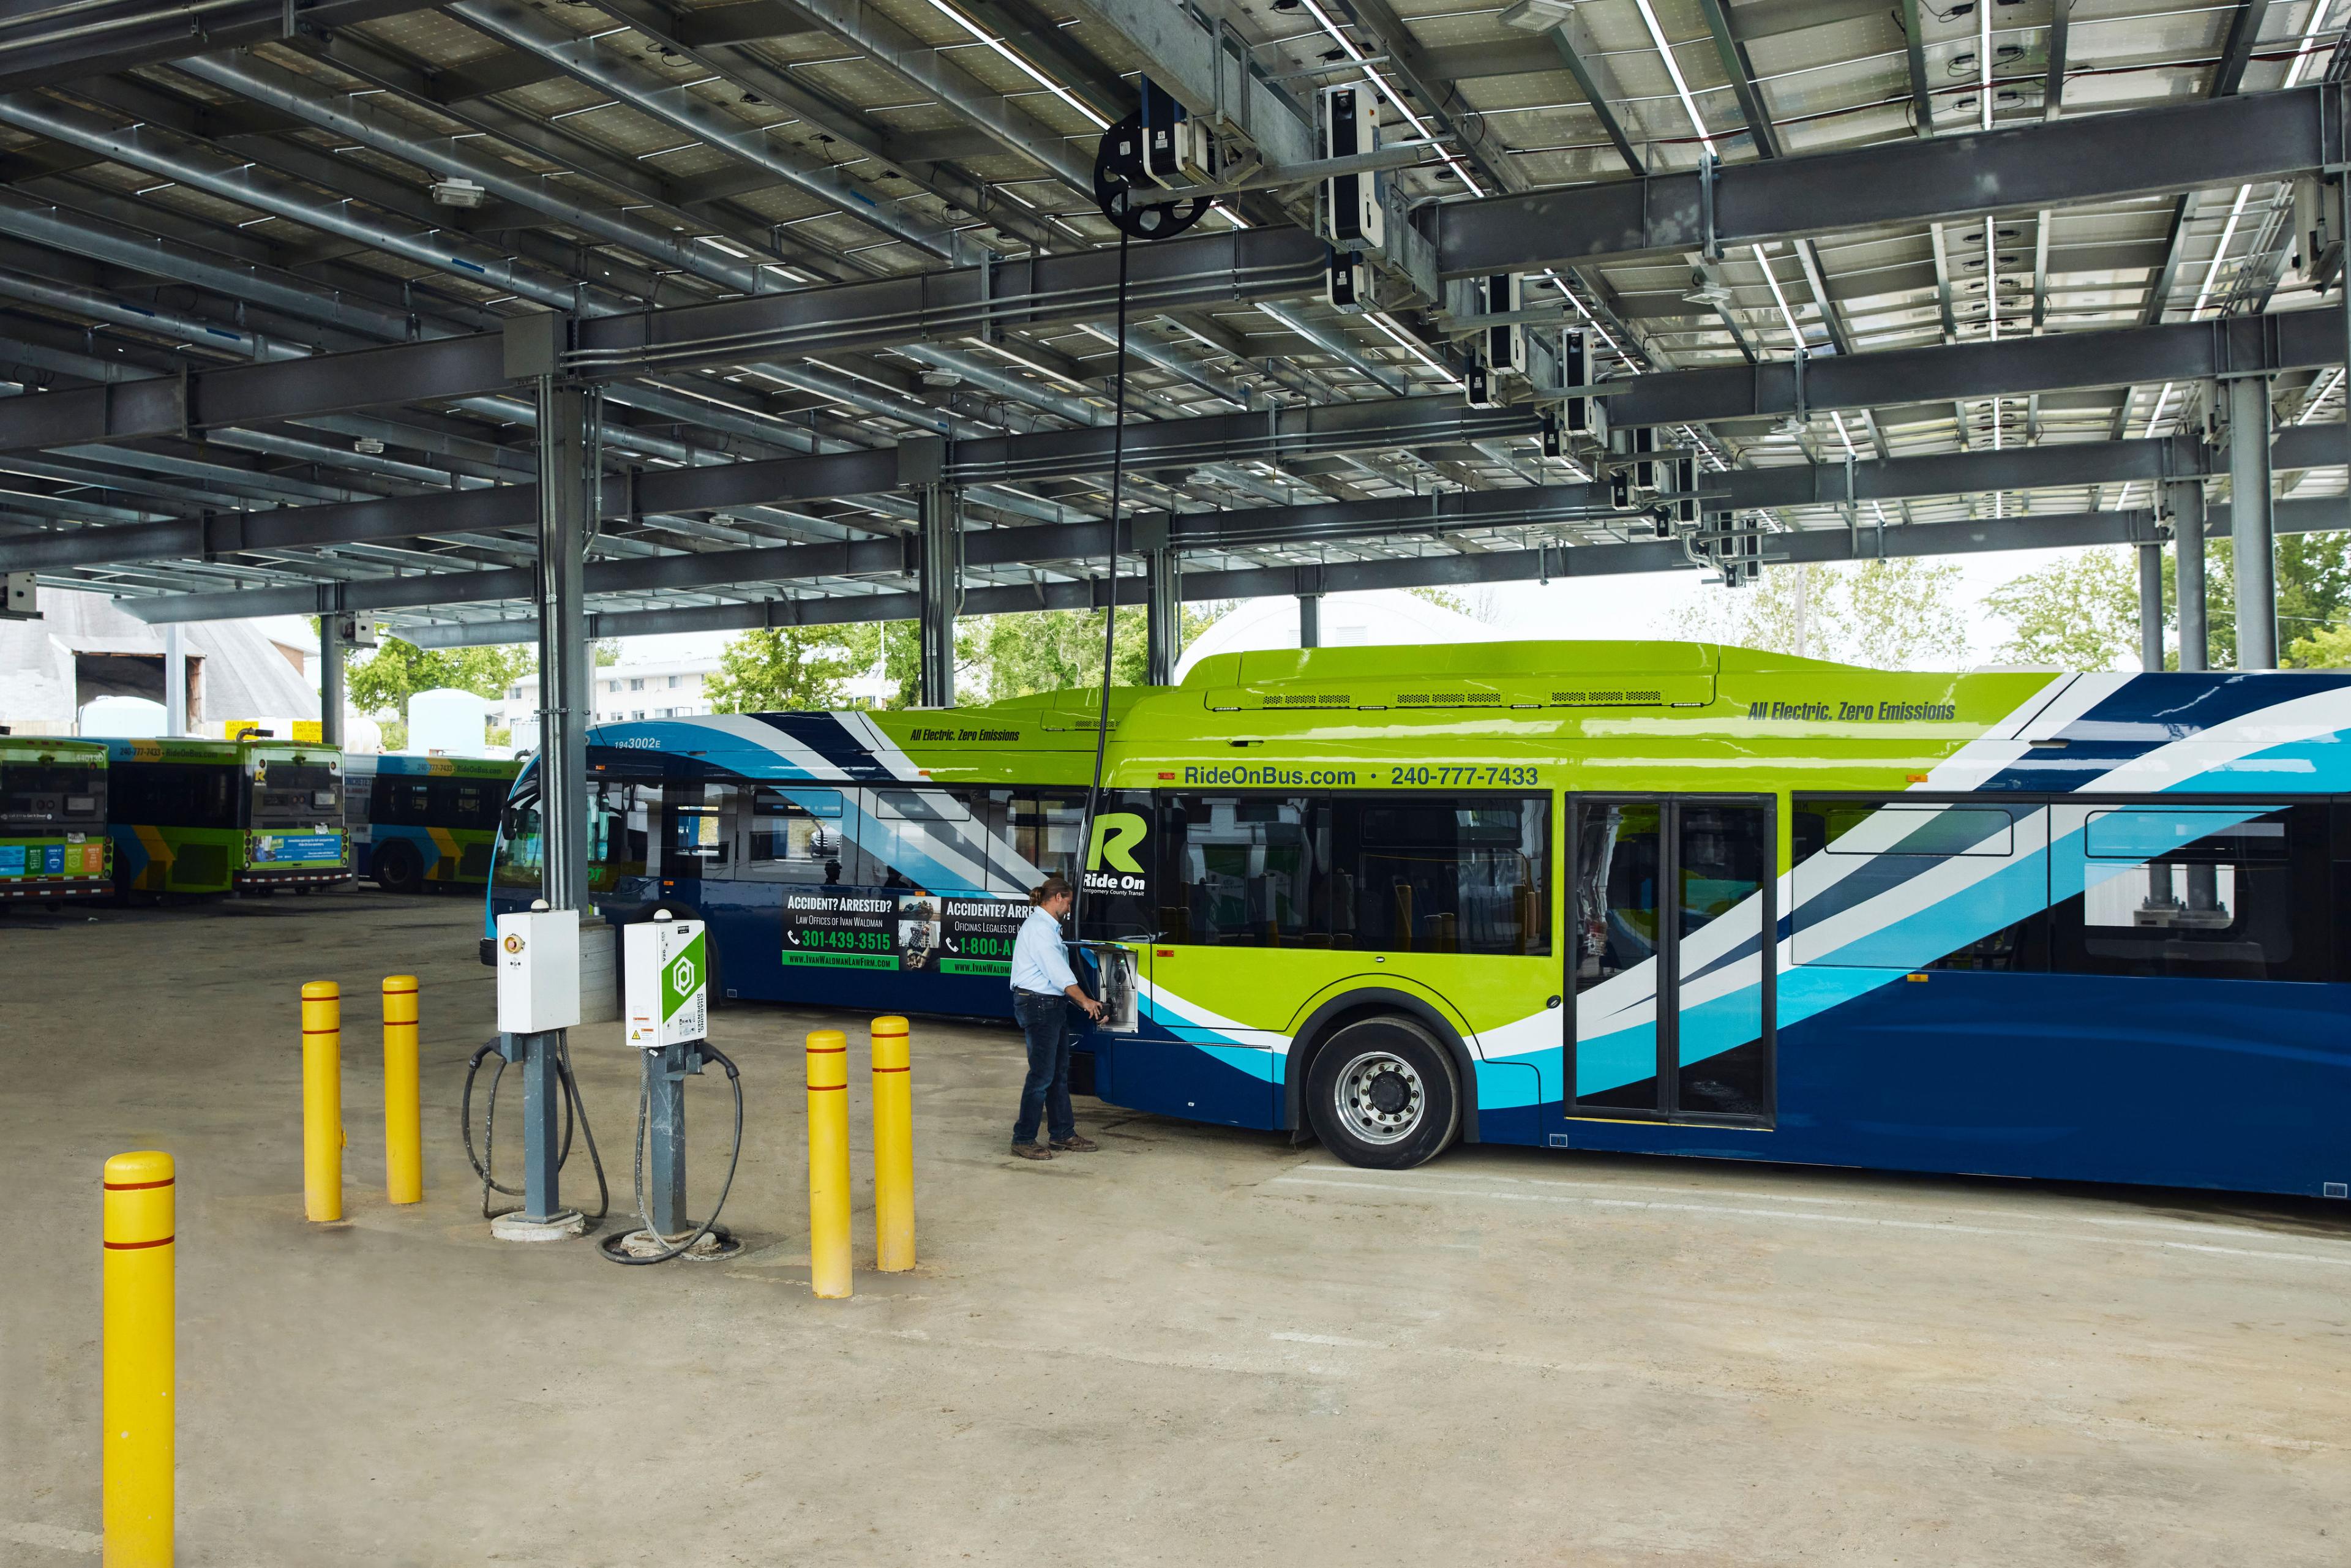 A man plugs in an electric bus under a canopy of solar panels.